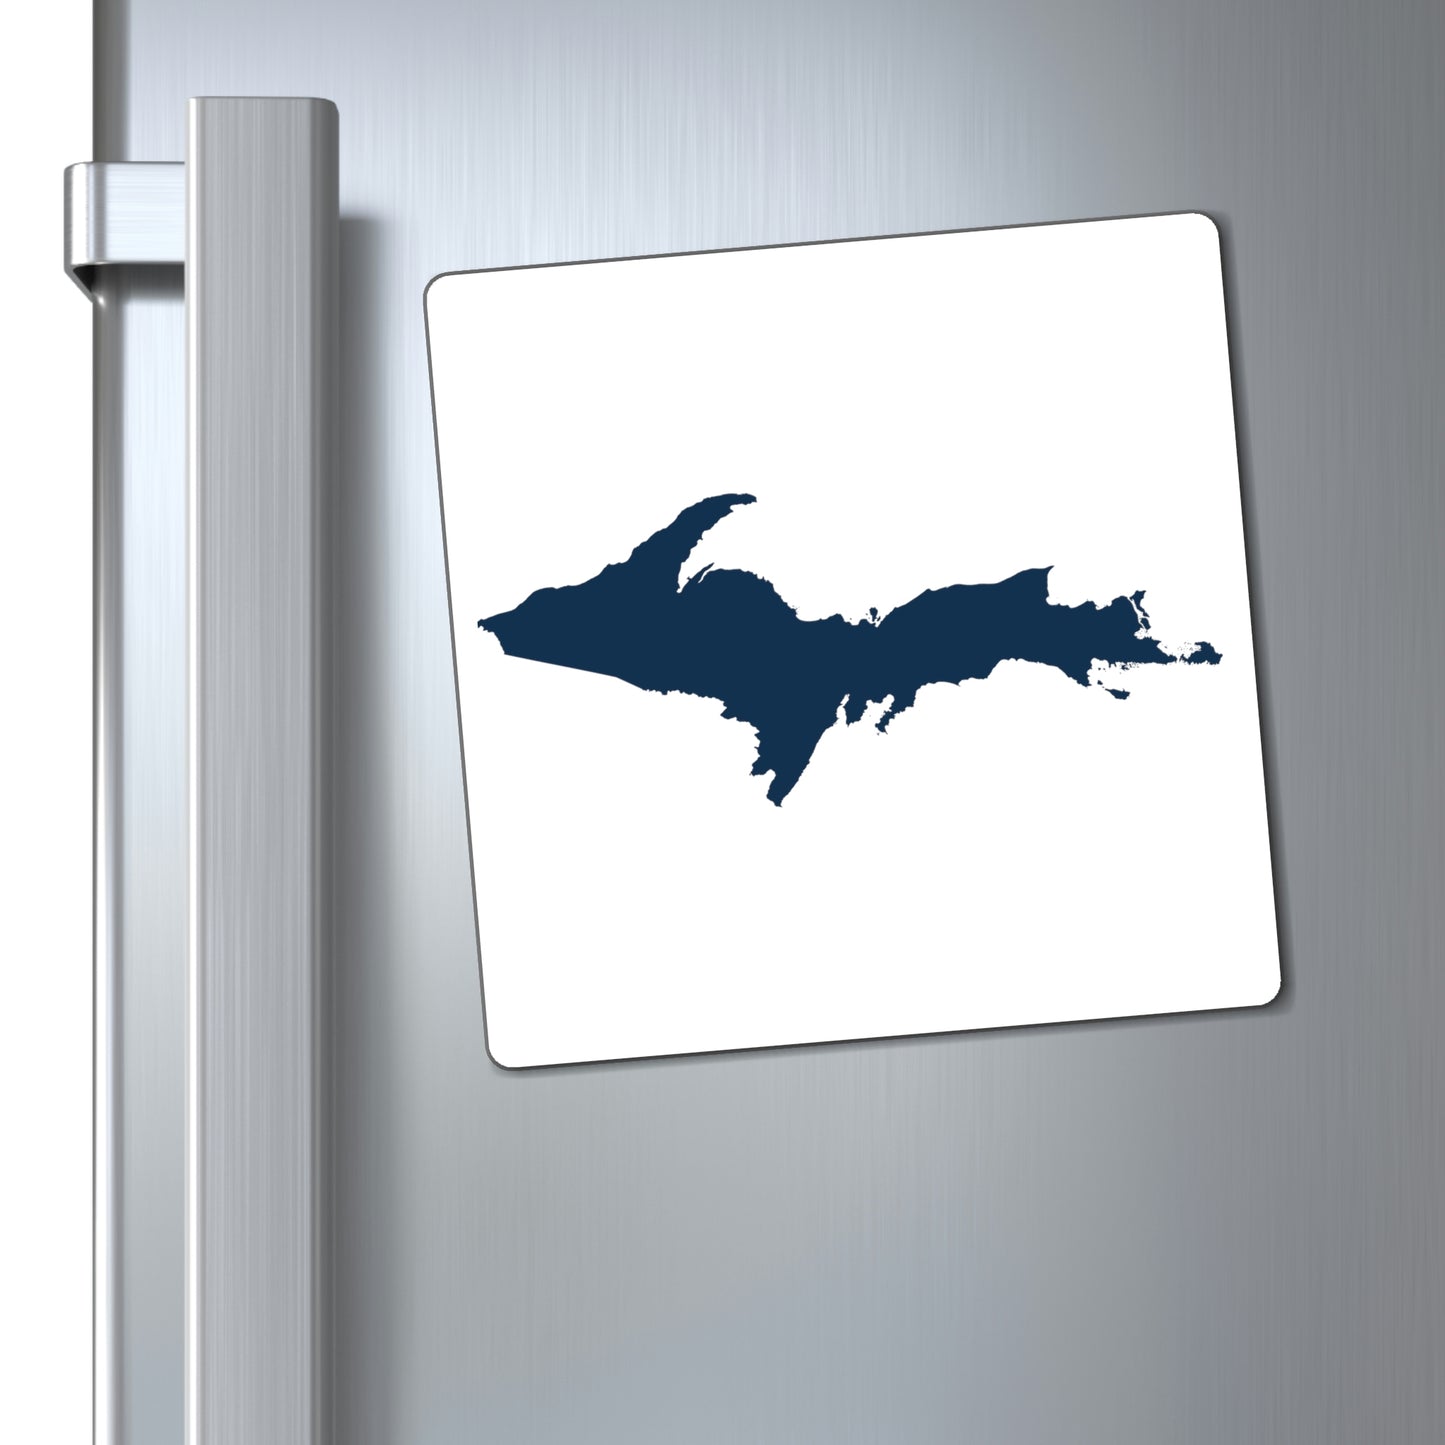 Michigan Upper Peninsula Square Magnet (w/ Navy UP Outline)